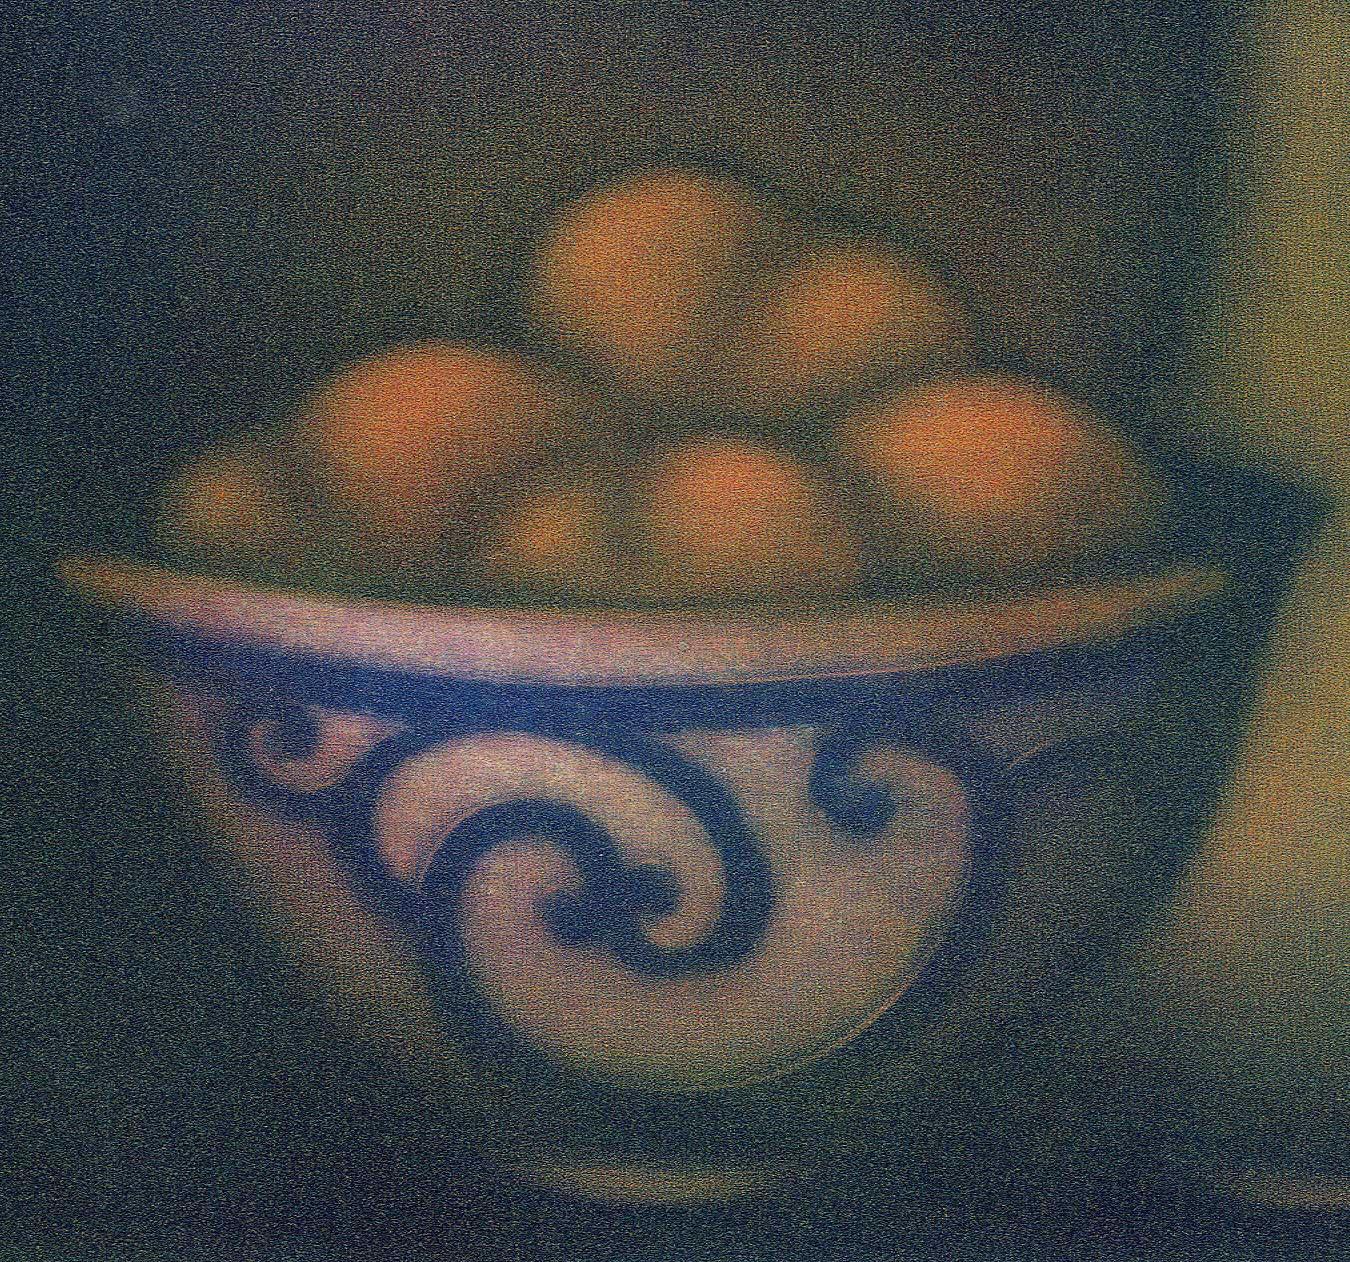 Blue and White Bowl of Fruit next to Vase - Print by Laurent Schkolnyk